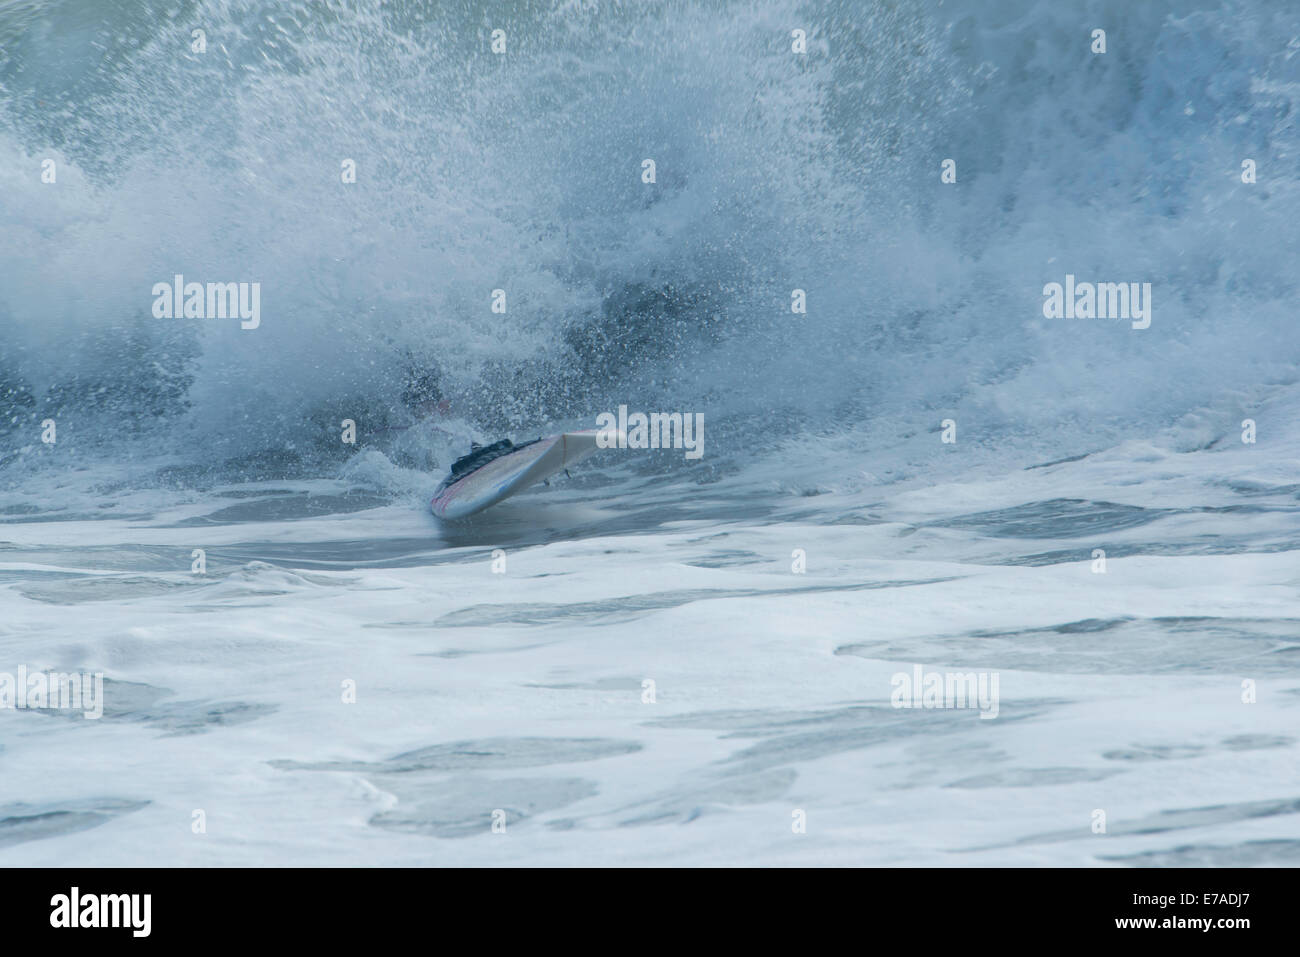 Surfboard appearing from waves after surfer has wiped out Stock Photo